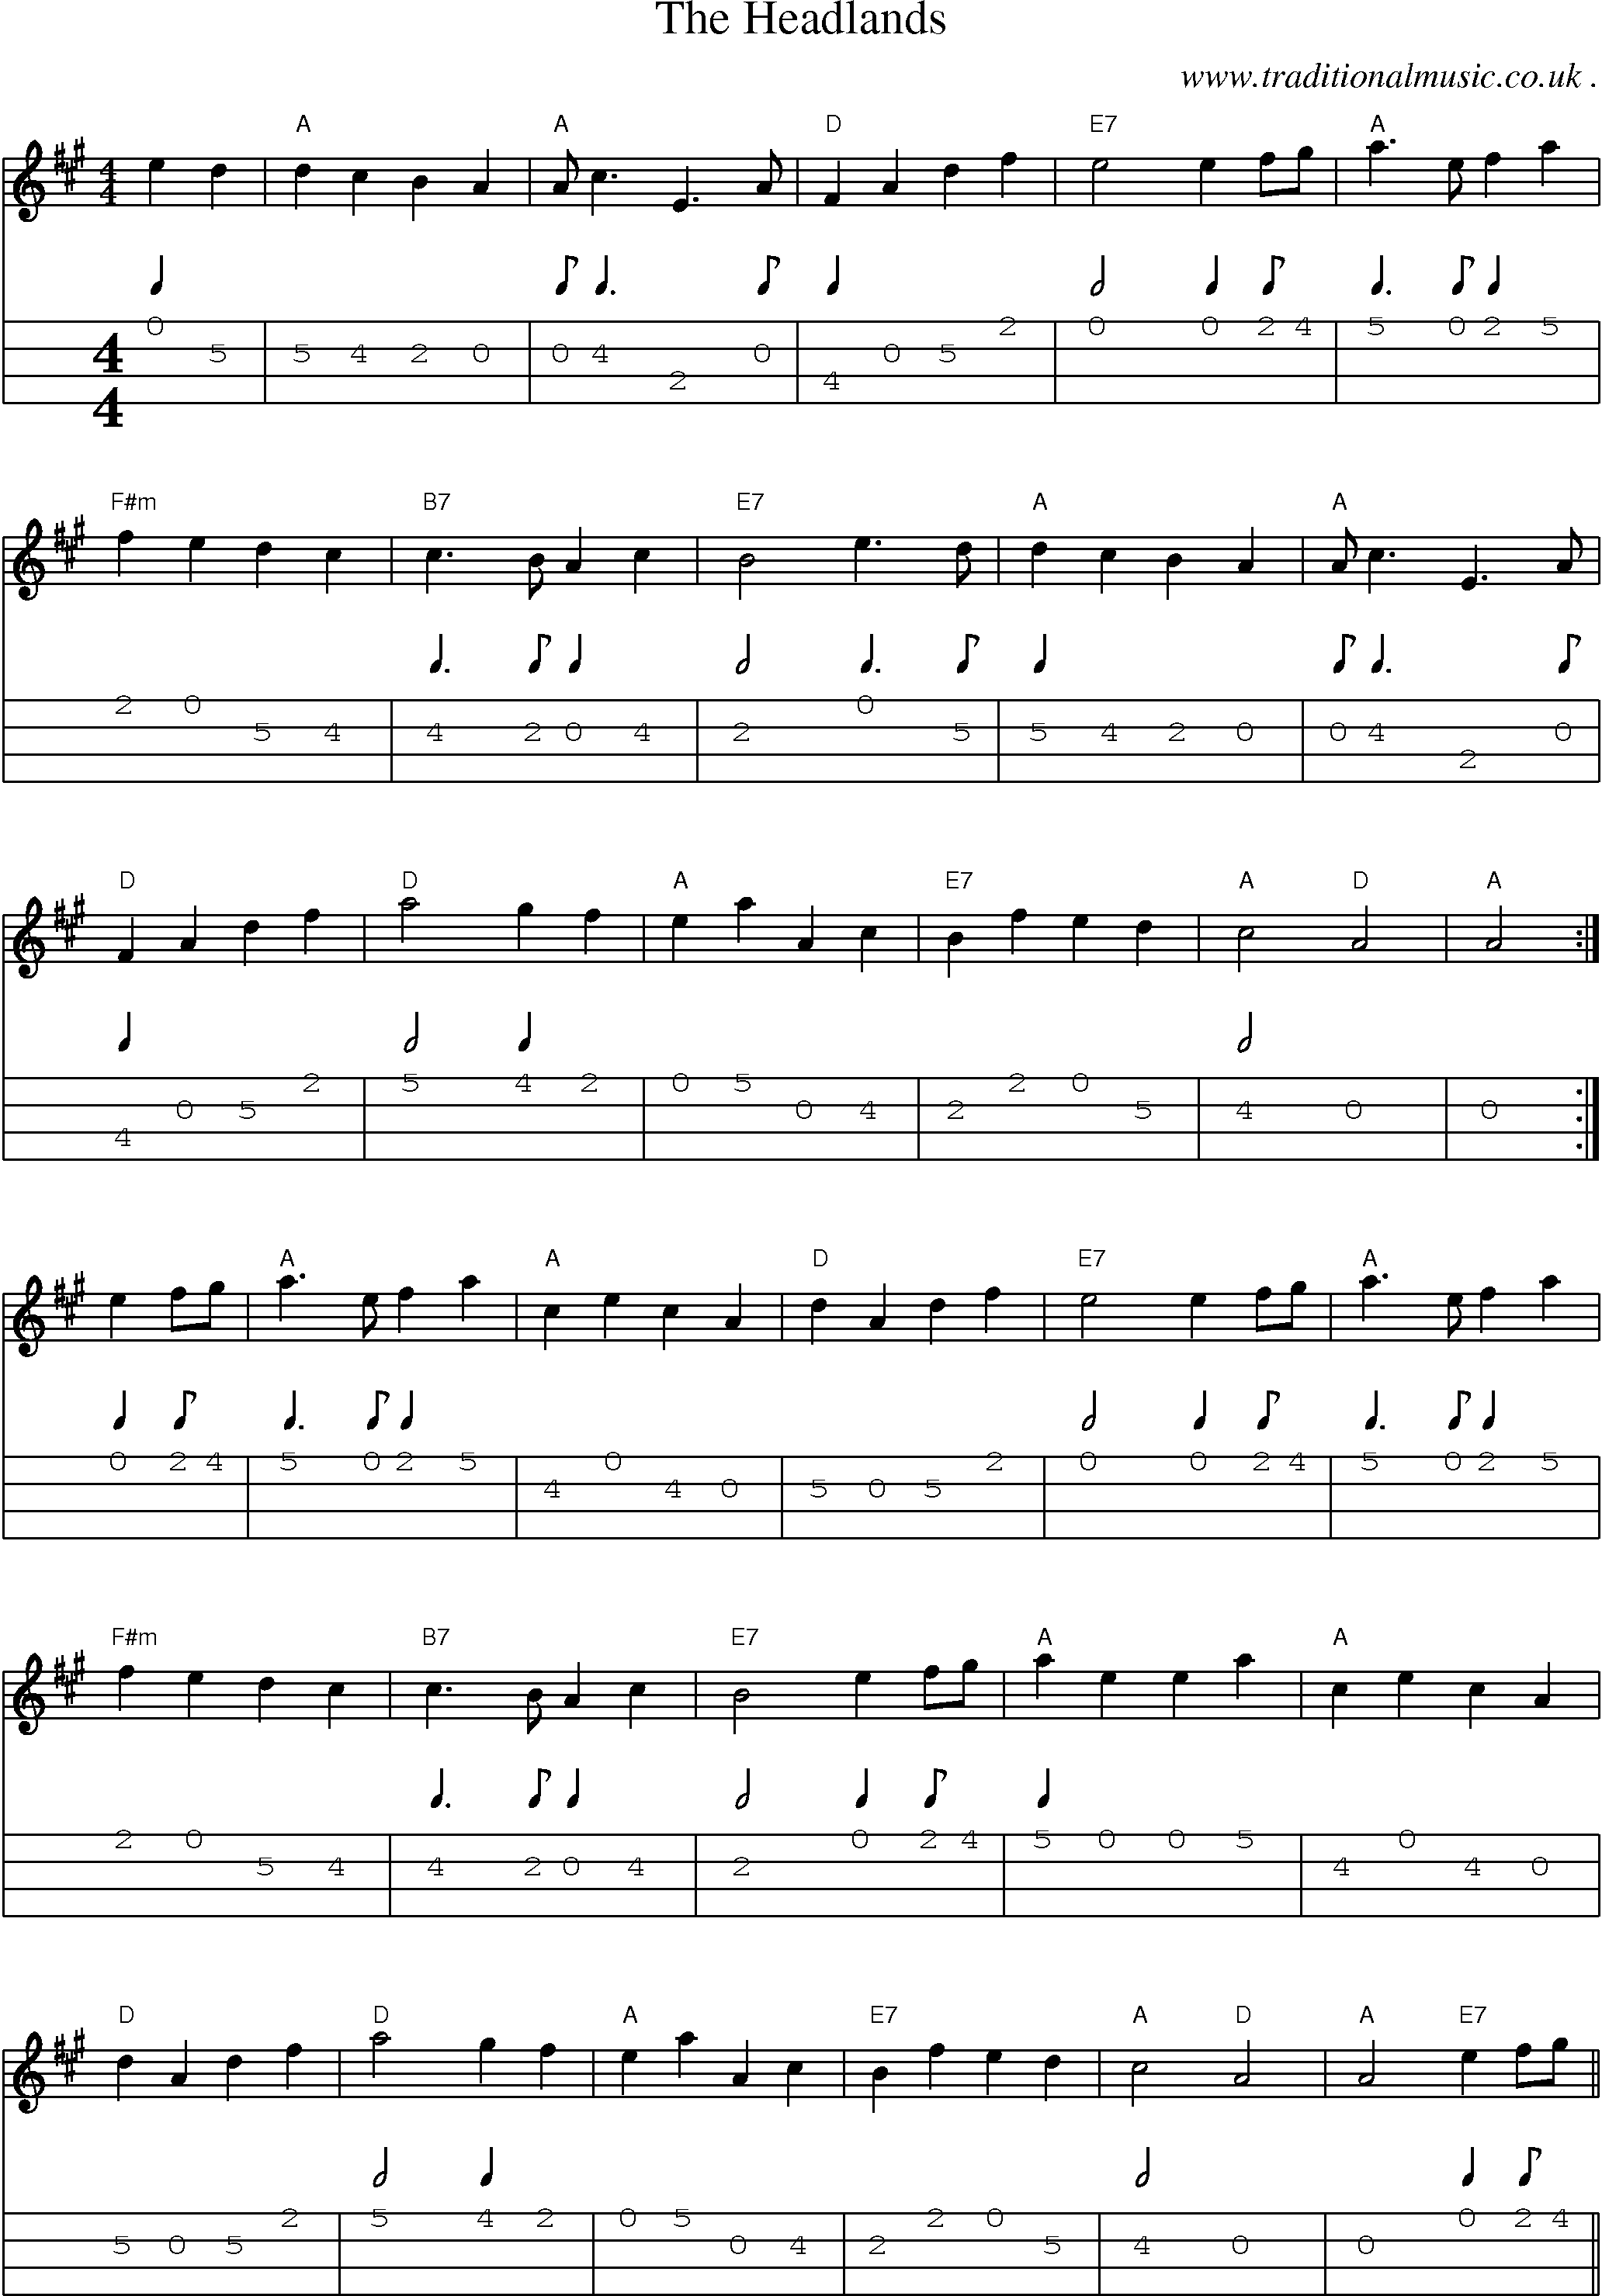 Sheet-Music and Mandolin Tabs for The Headlands